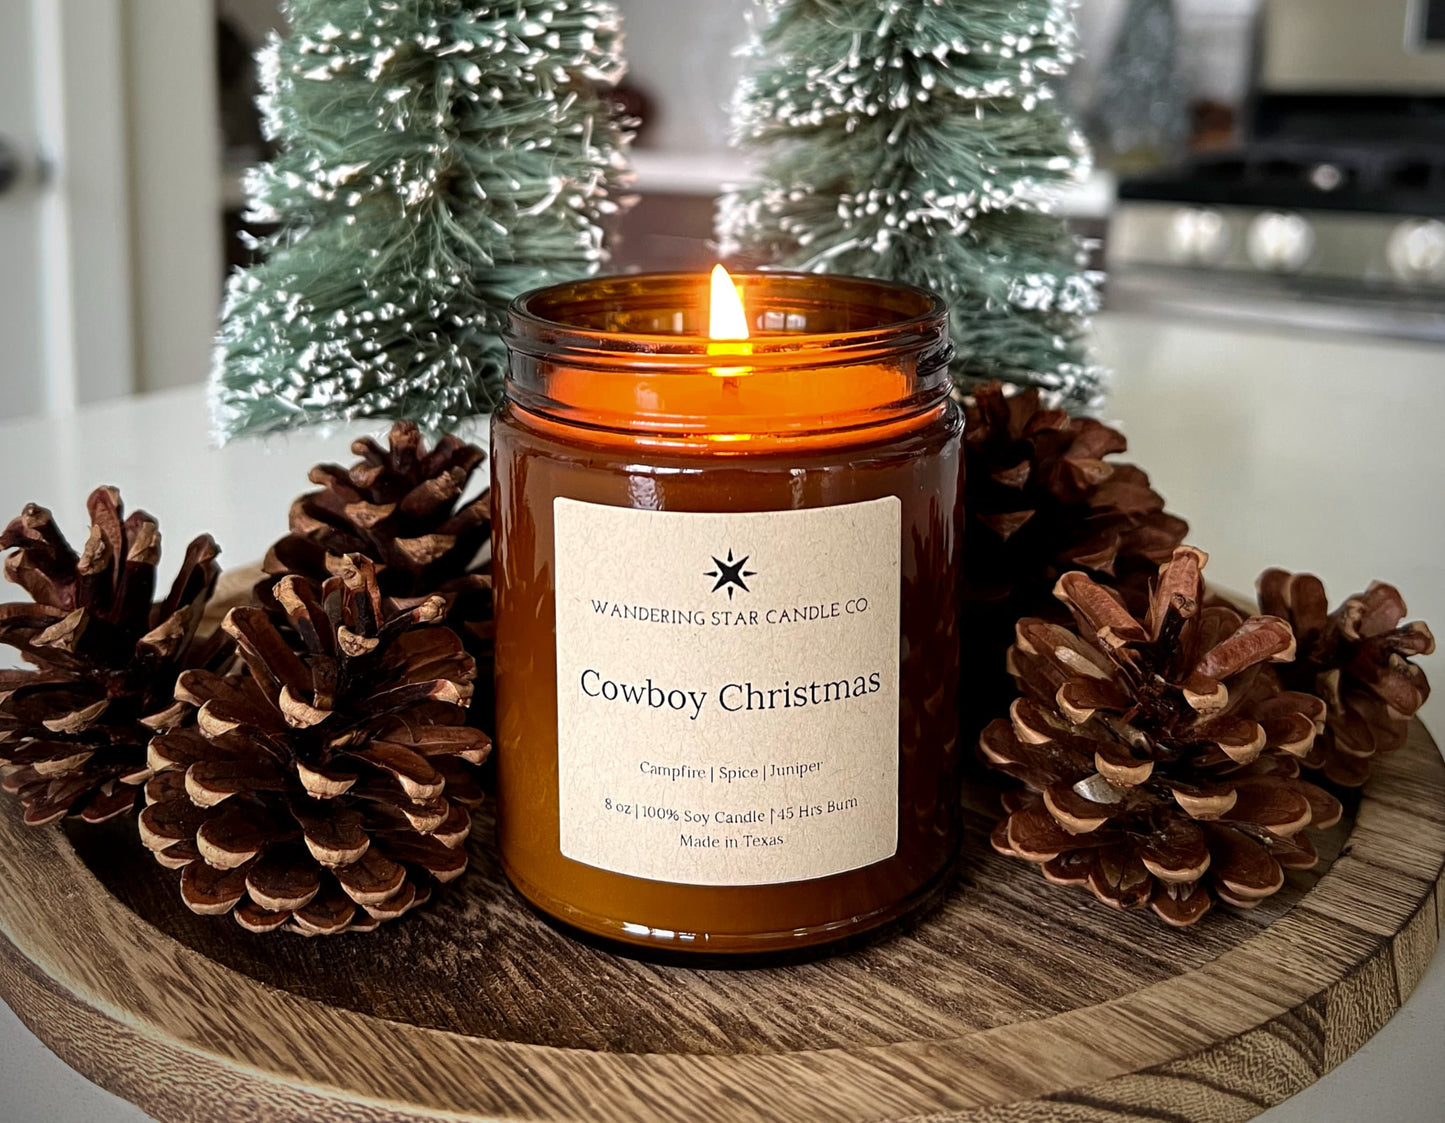 Photo of a lit amber jar candle featuring the scent of Cowboy Christmas, which is a blend of Campfire, Spice, and Juniper.